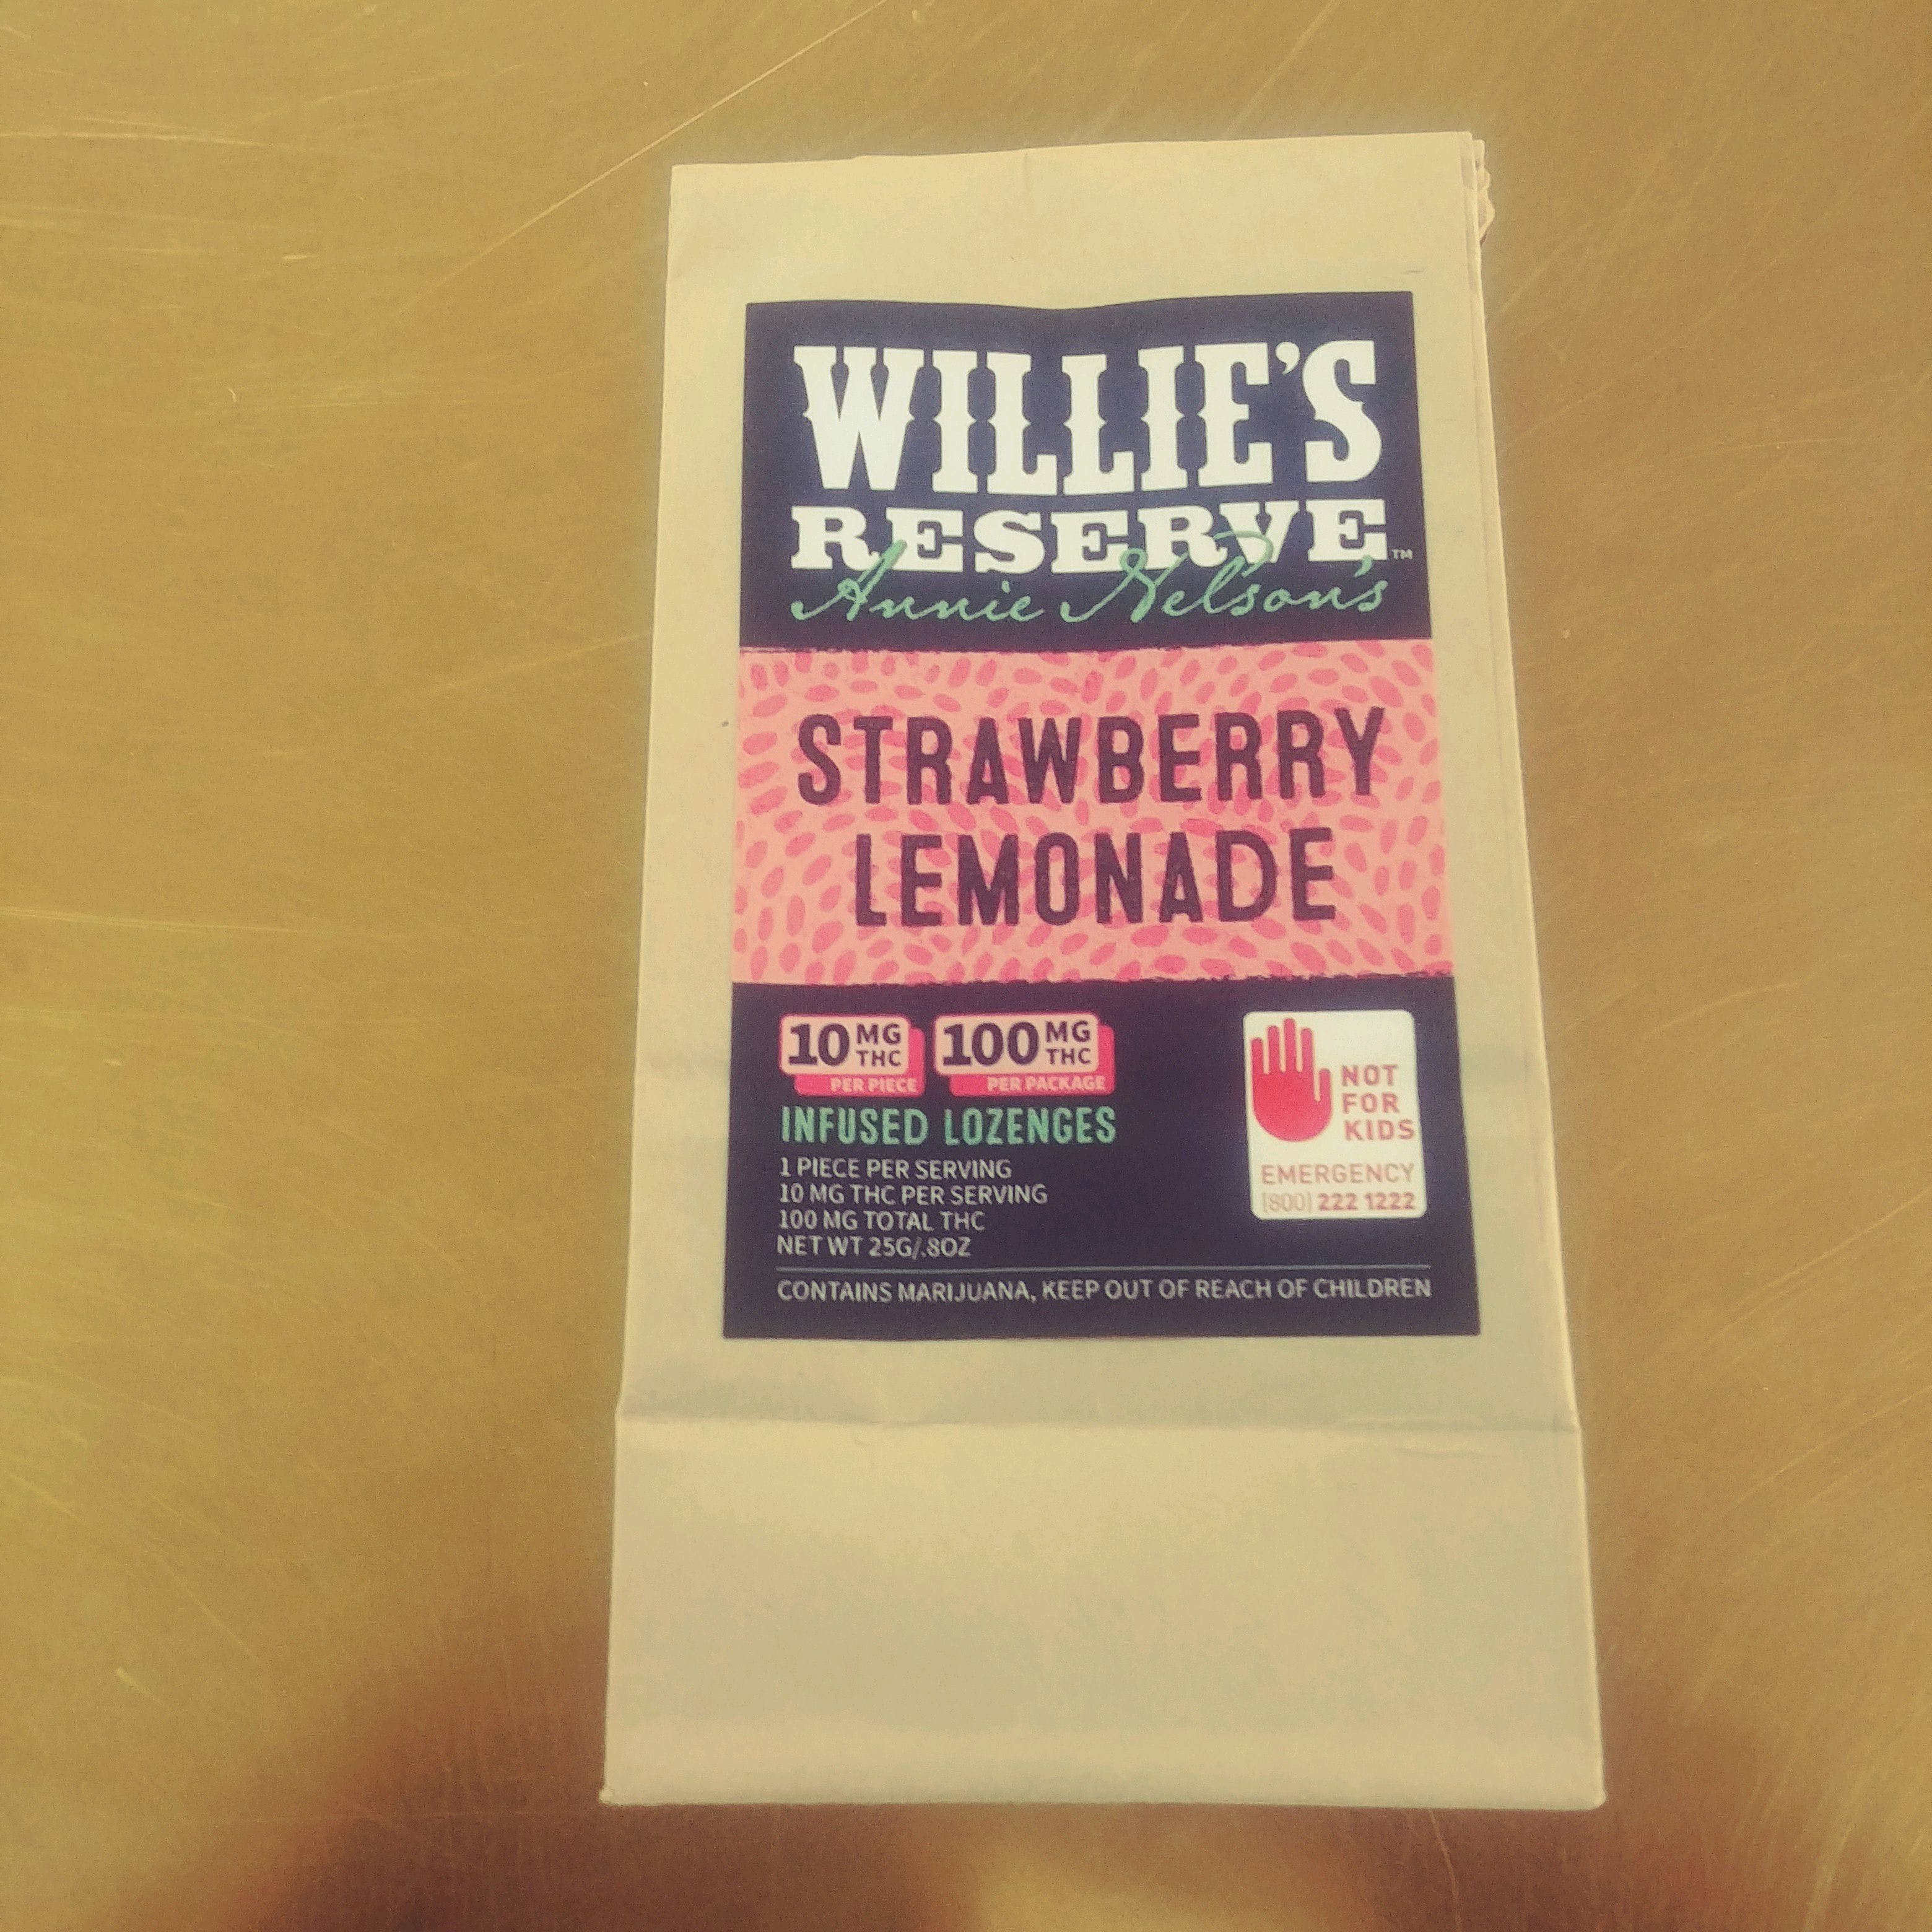 Strawberry Lemonade 10mg 10 Pack by Willie's Reserve